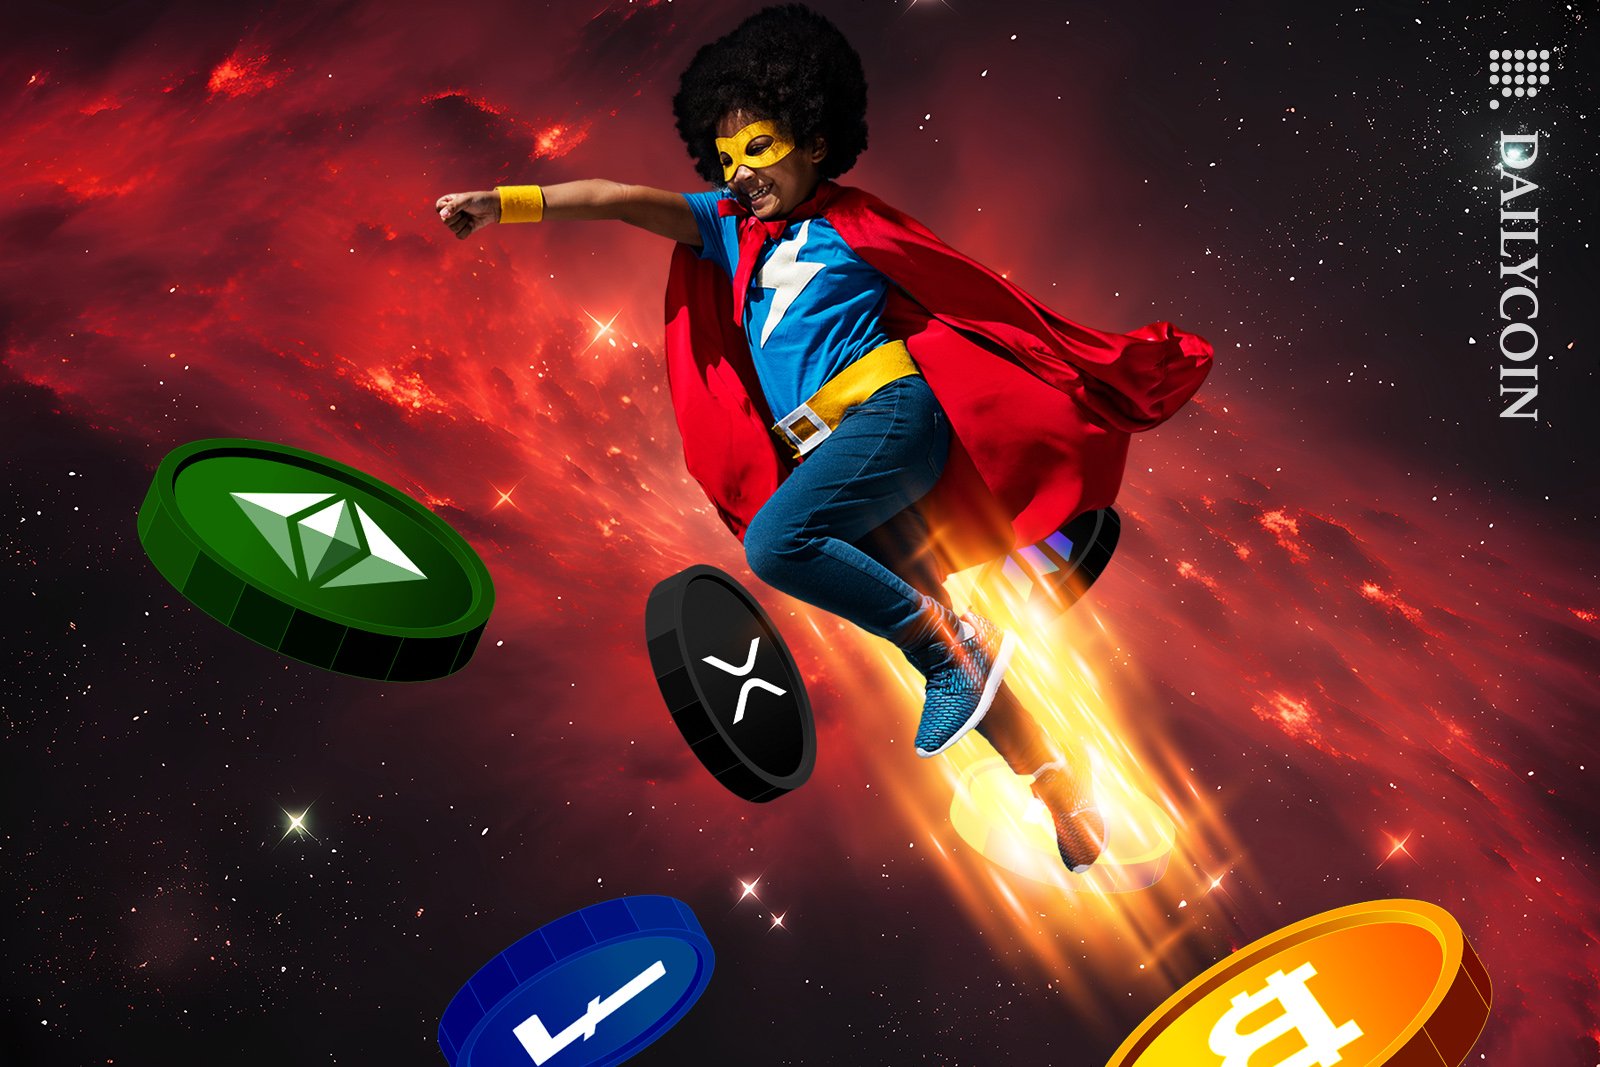 Girl dressed as a superhero jumped all the way to space atmosphere with crypto coins.